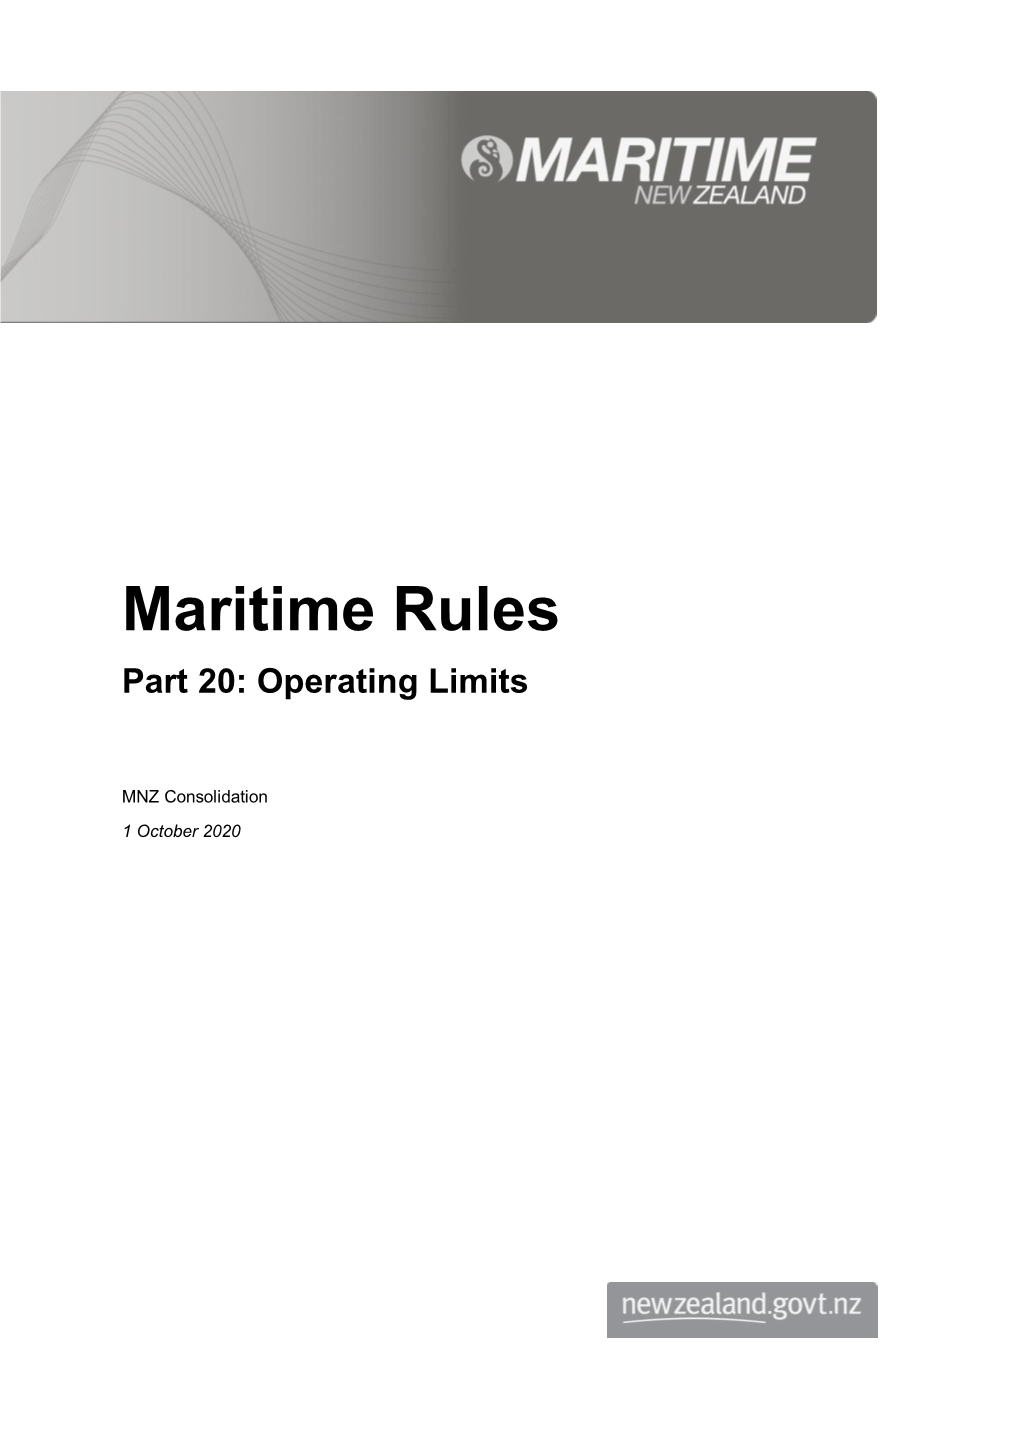 Maritime Rules Part 20: Operating Limits